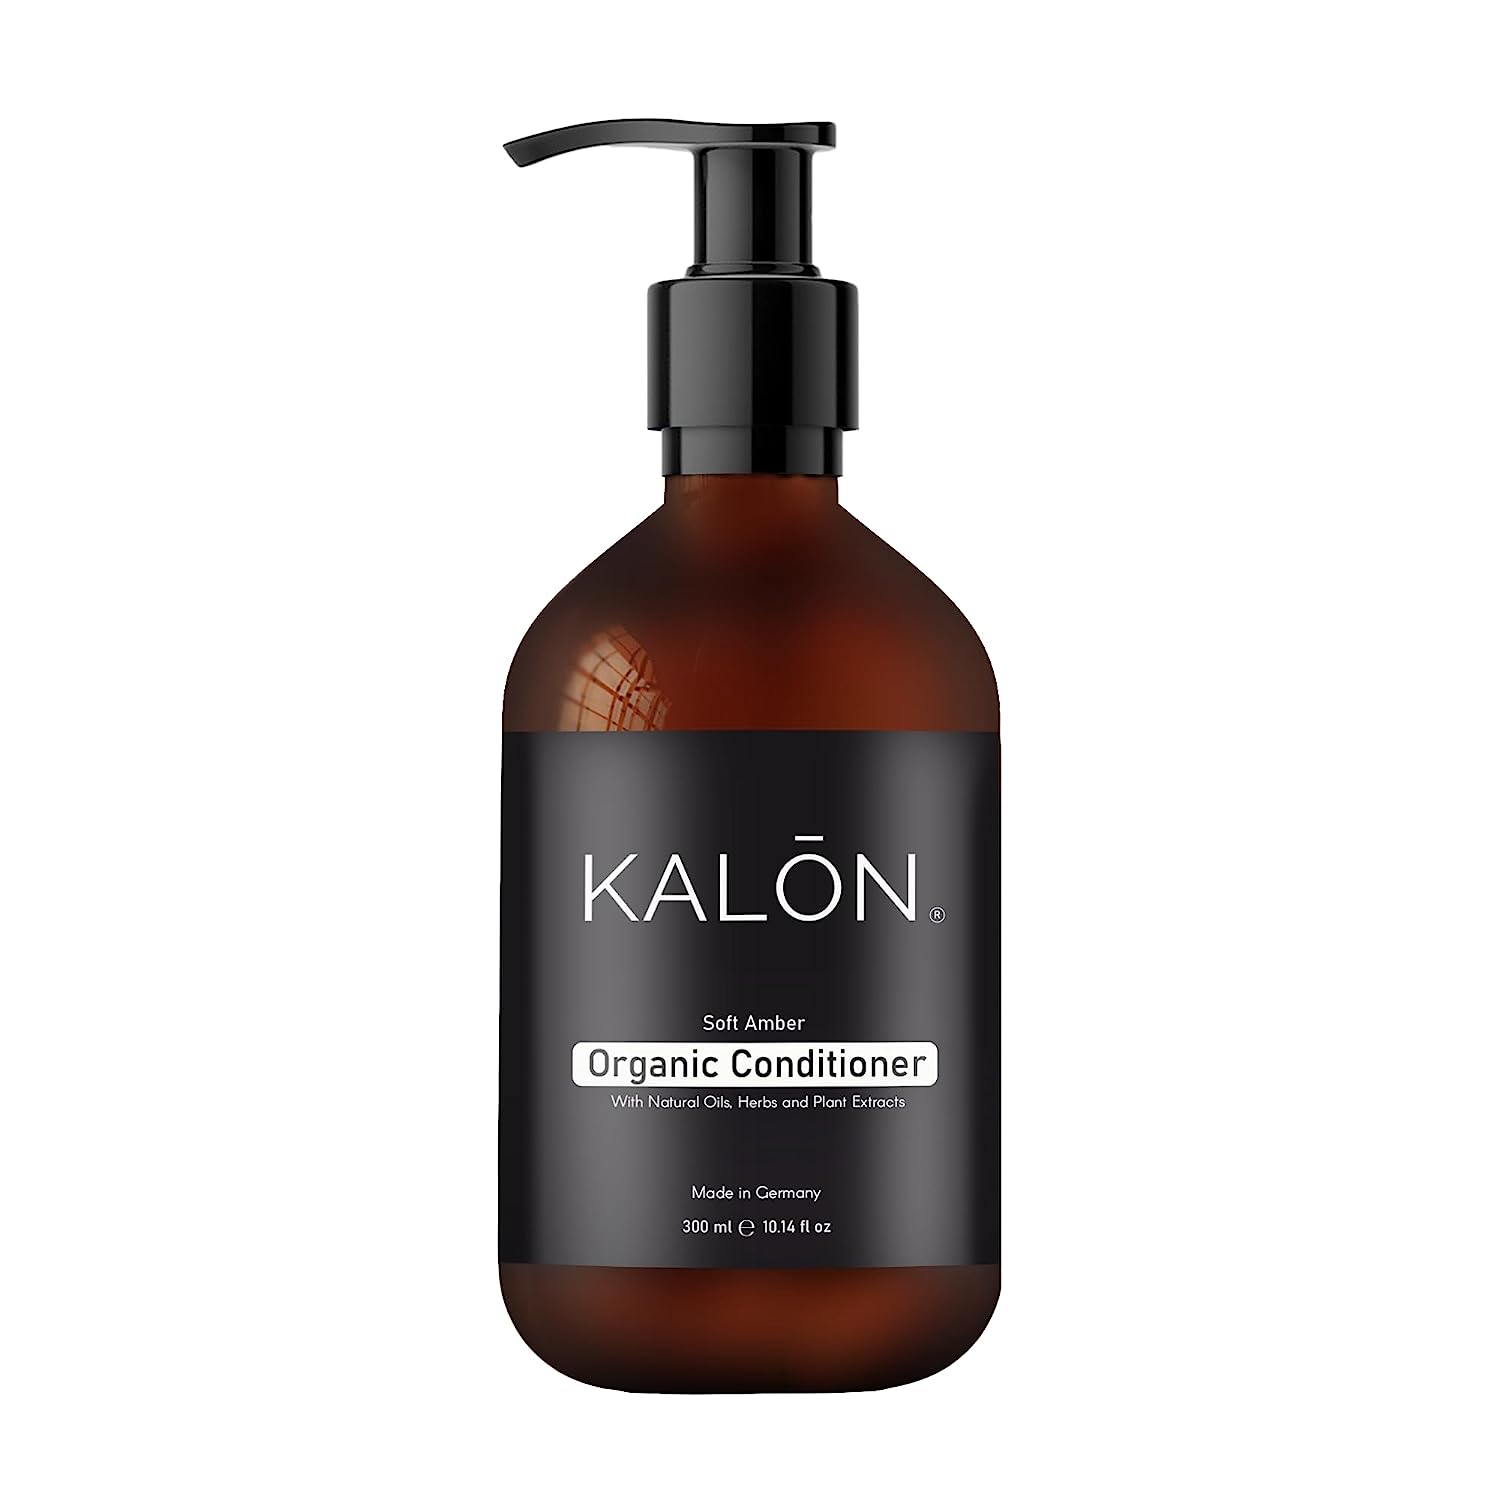 Kalōn - Organic Conditioner with Coconut, Rosemary, Vanilla and Amber Oil - Organic, Handmade, Vegan, Unisex, For Soft, Radiant and Fragrant Hair